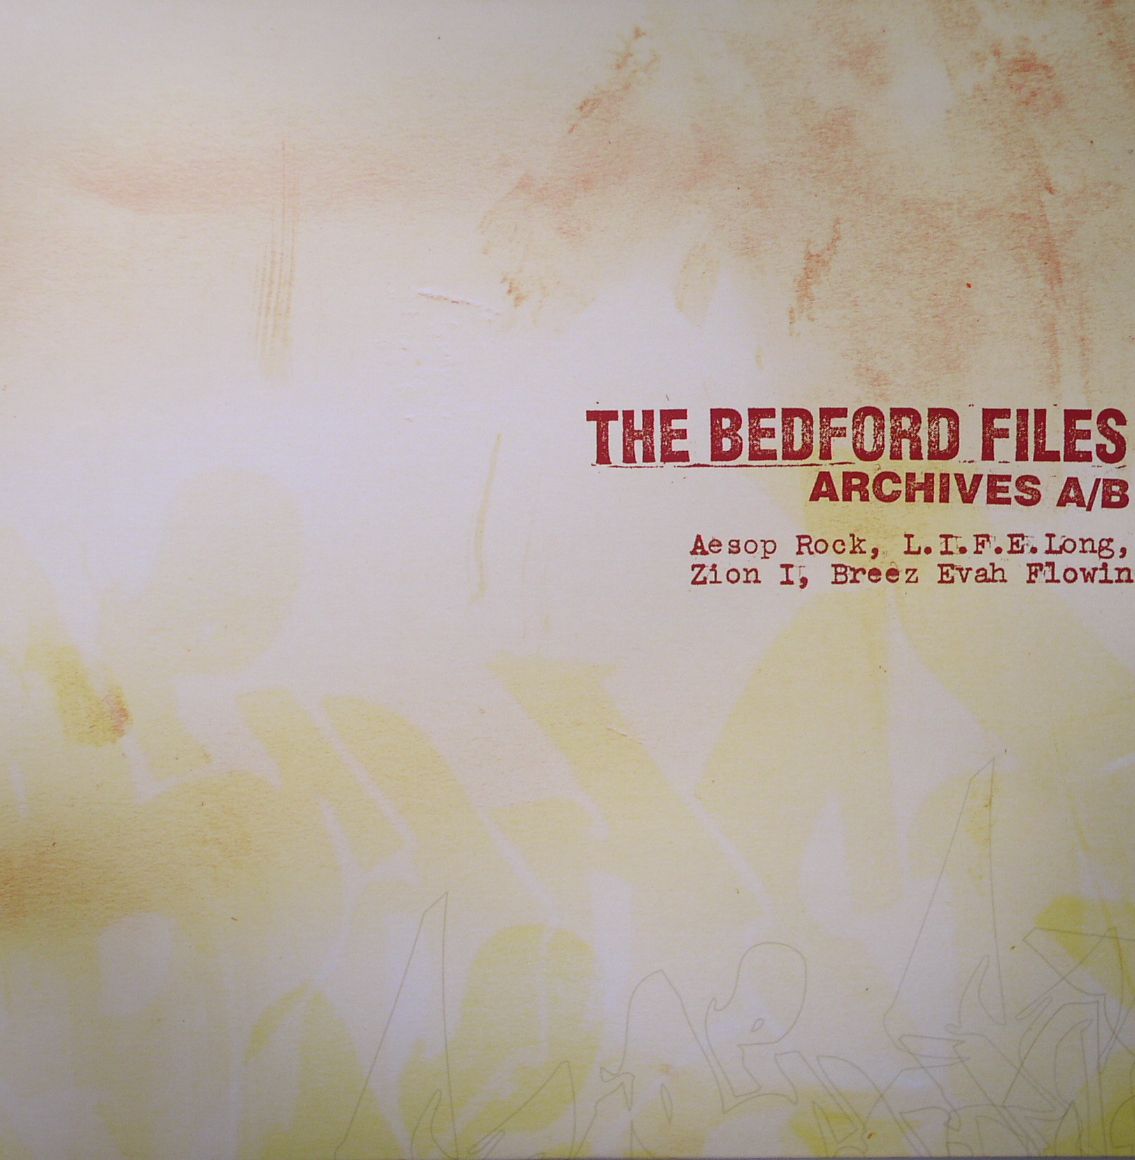 BEDFORD FILES, The - Archives A/B